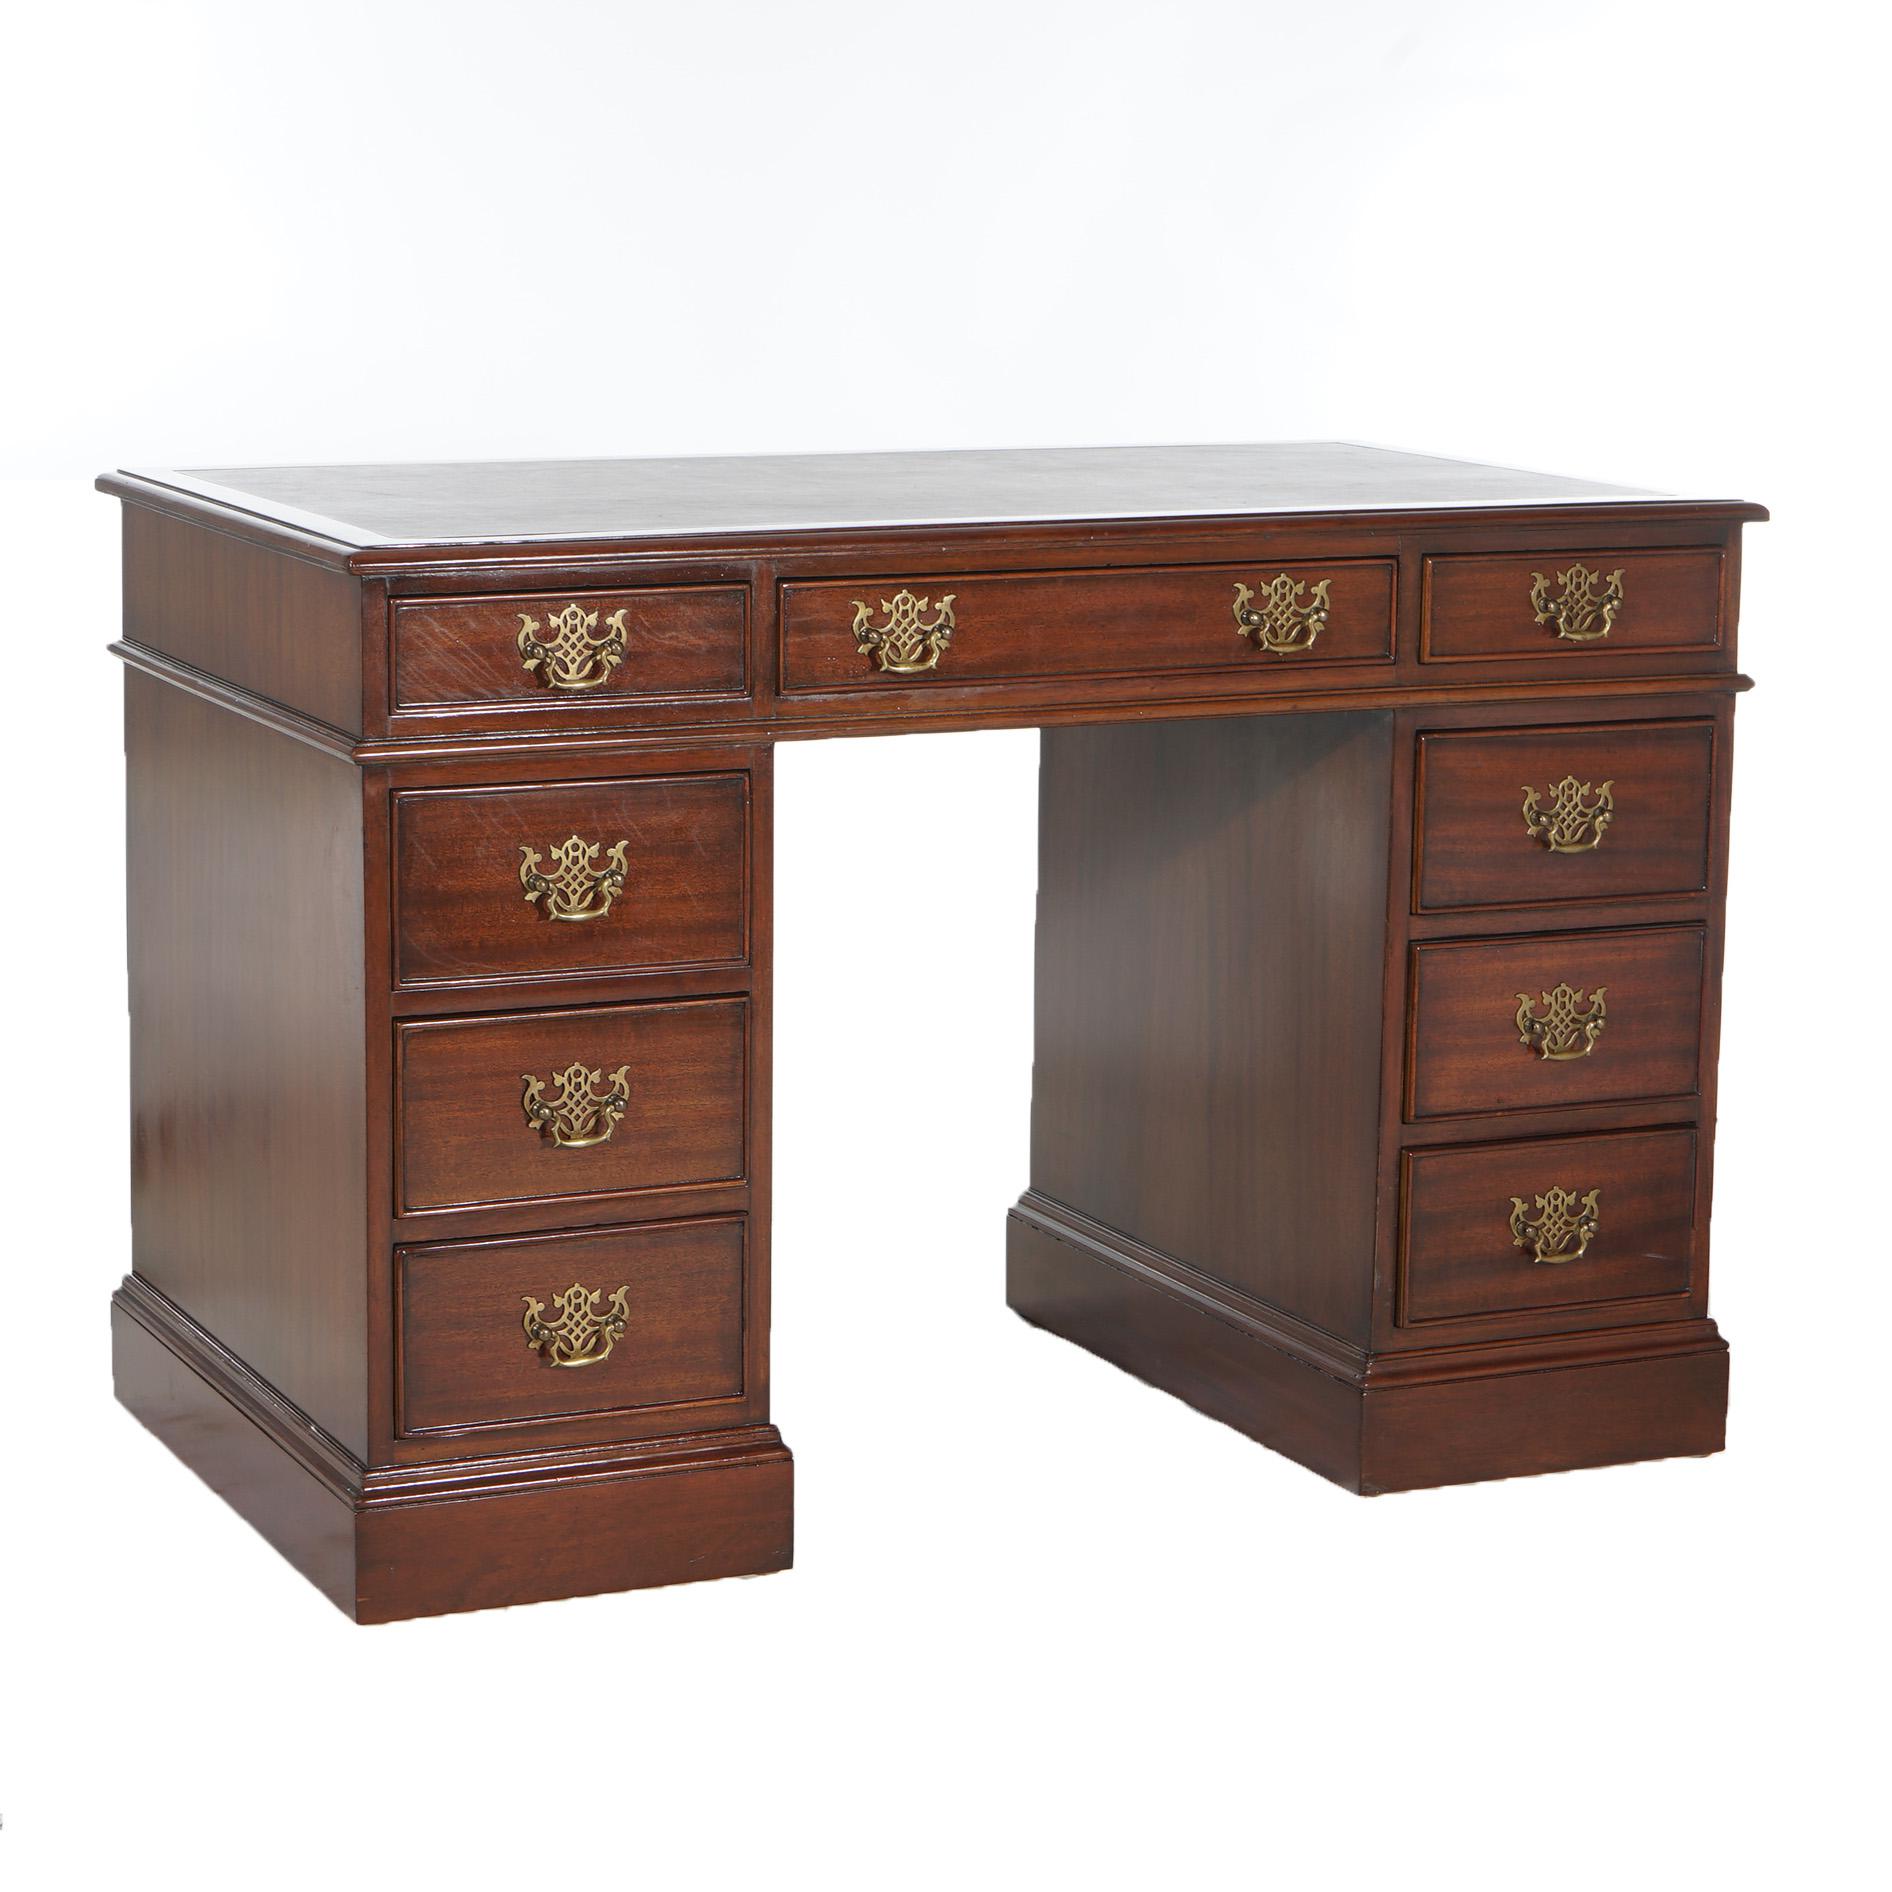 Kittinger Chippendale Style Mahogany Knee Hole Desk with Drawer Towers 20thC For Sale 7